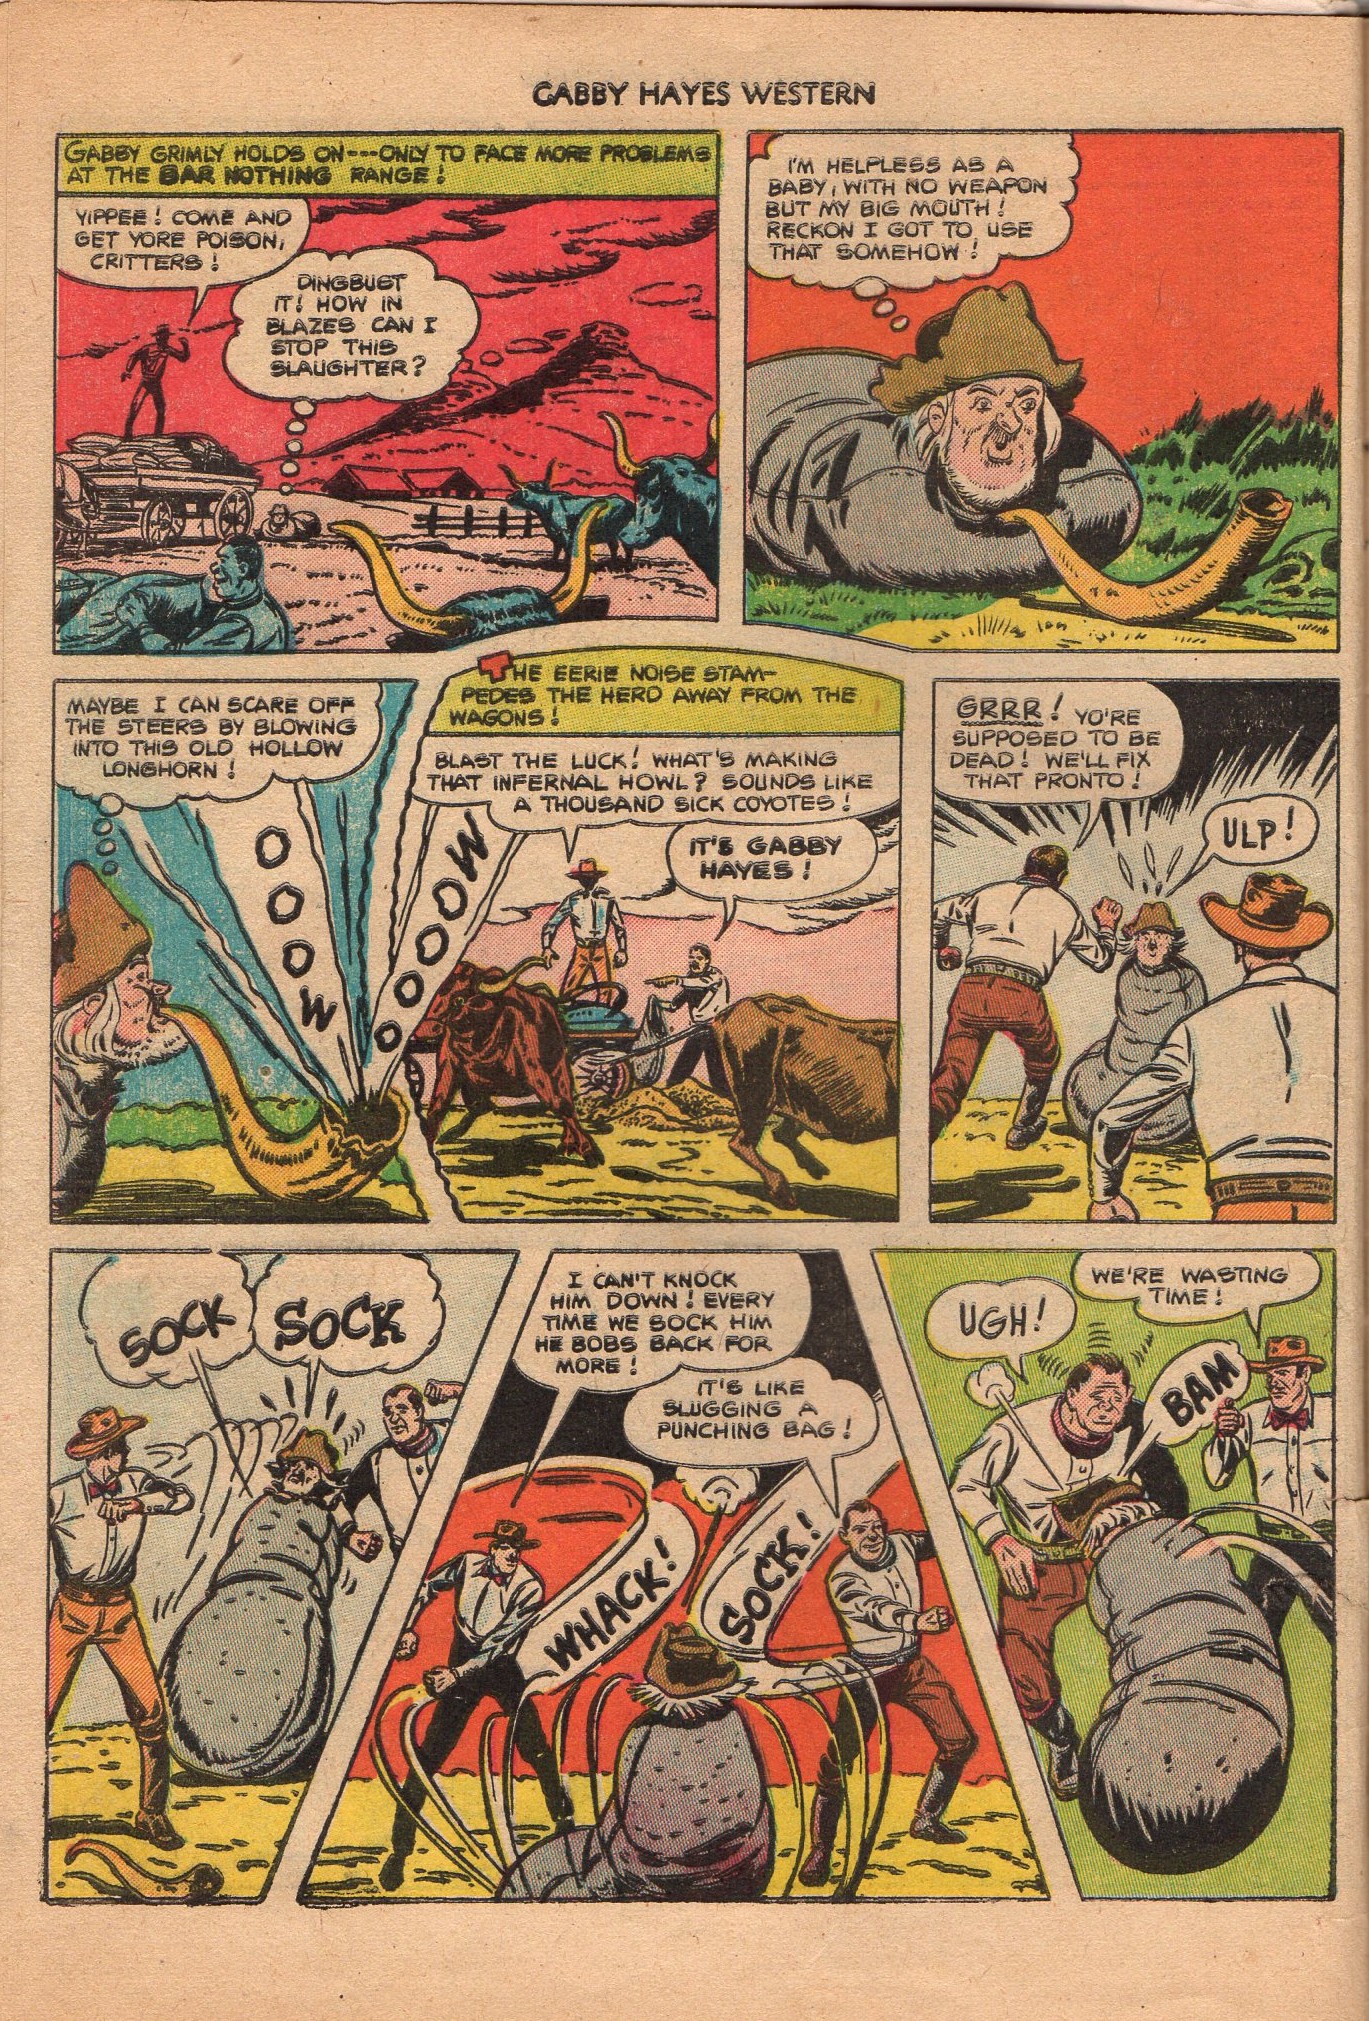 Read online Gabby Hayes Western comic -  Issue #46 - 8